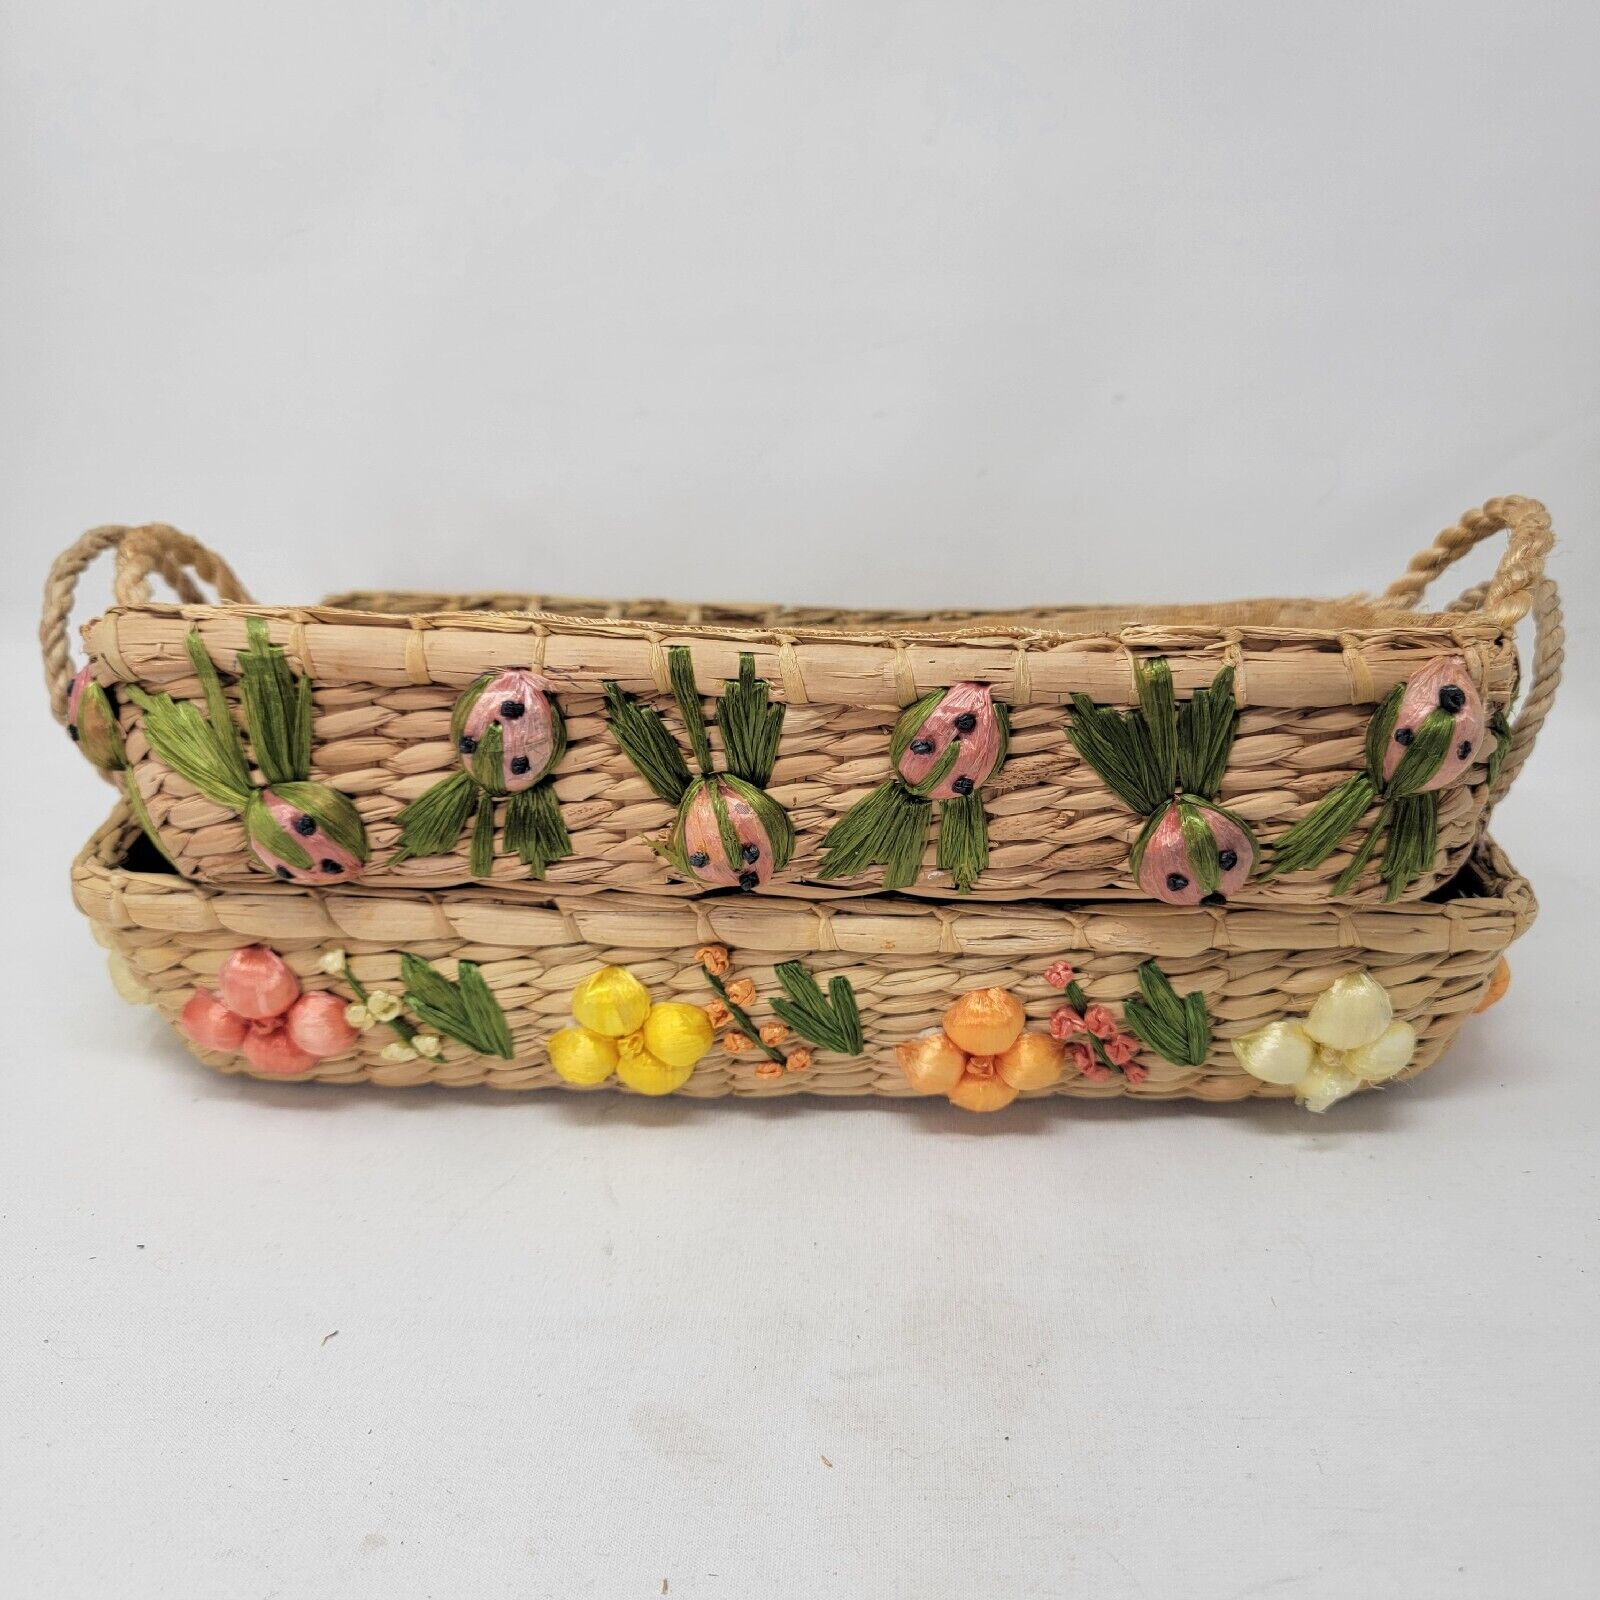 Vintage Tray Basket W/ Handles Woven Colorful Fruit Around Sides- Philippines 2